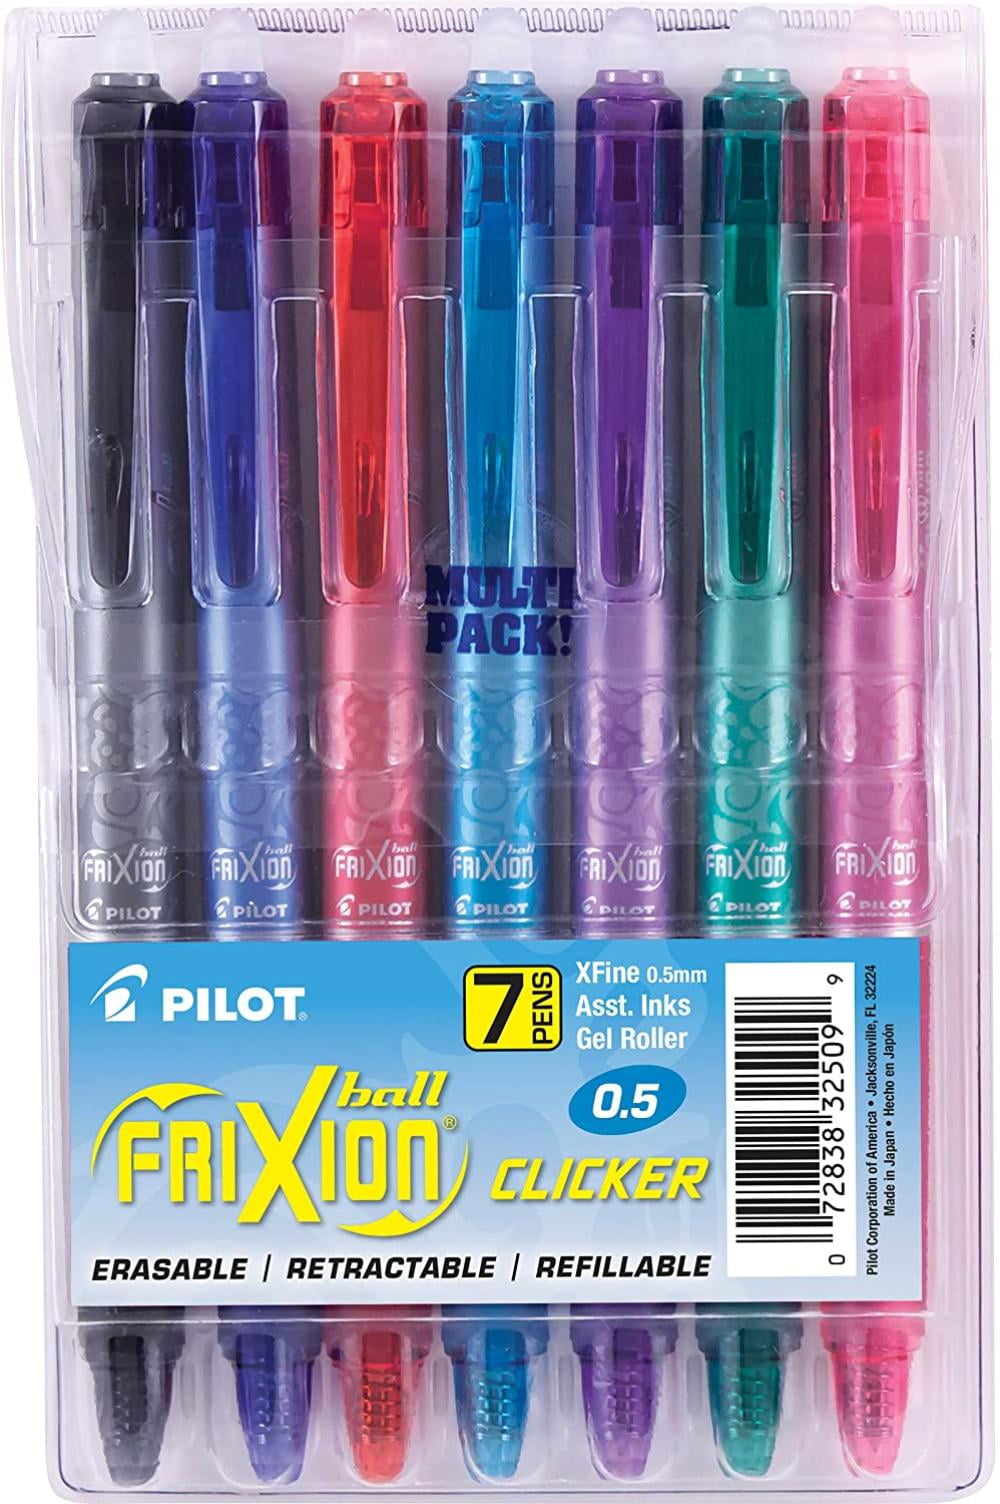 PILOT FriXion Clicker Erasable 7-Pack Pouch Assorted Color Inks Refillable & Retractable Gel Ink Pens 32509 - 1 Extra Fine Point 